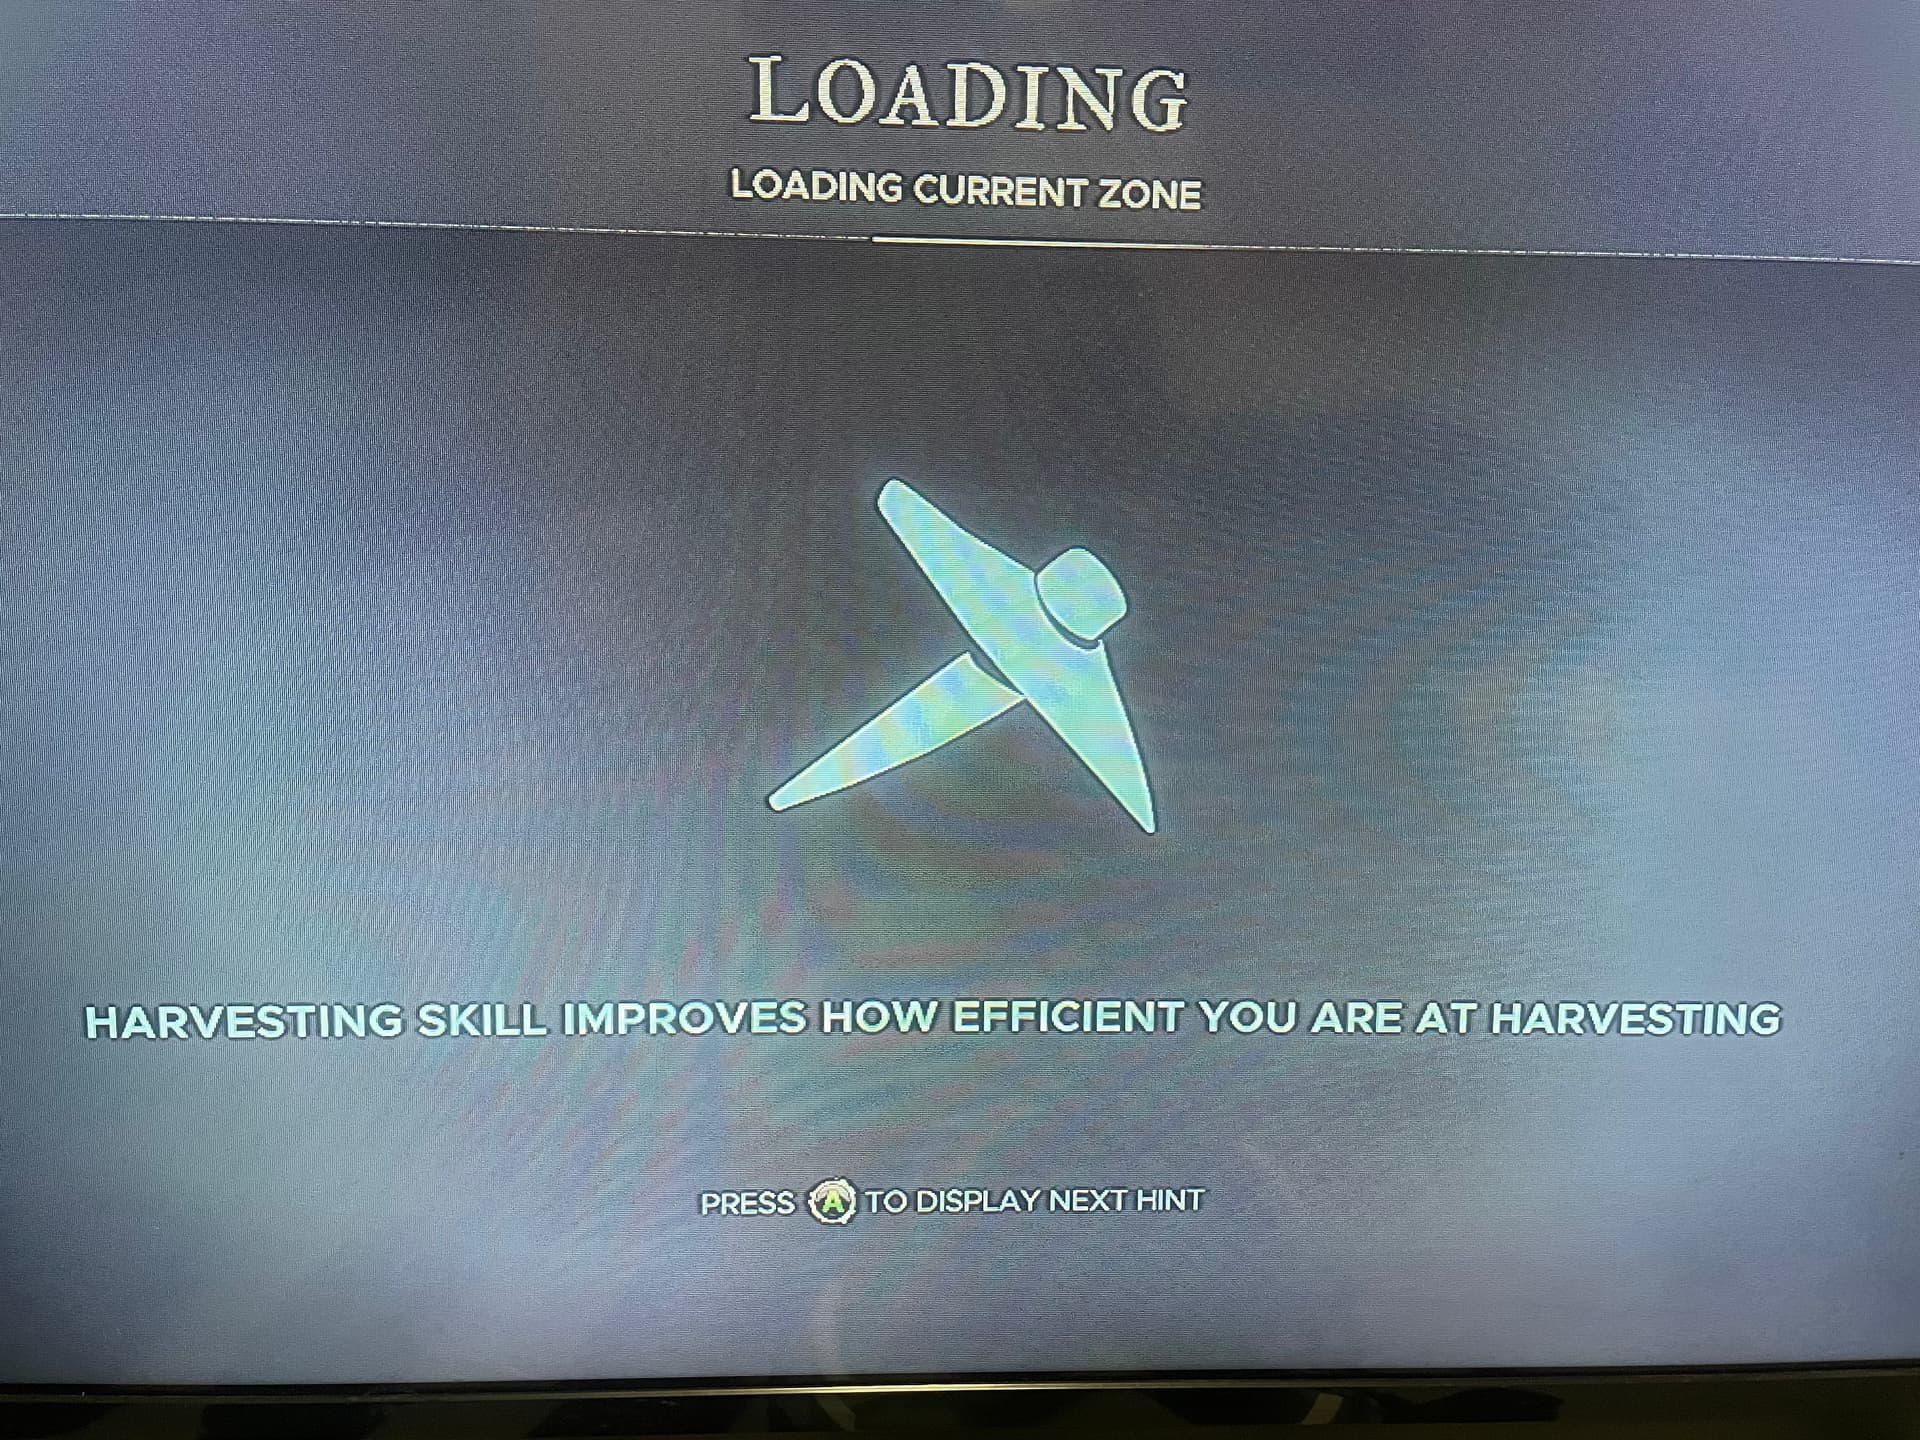 I have just bought stranded deep and I have been stuck on this loading  screen for ages I have tried re-installing and restarting multiple times  and nothing has worked : r/strandeddeep